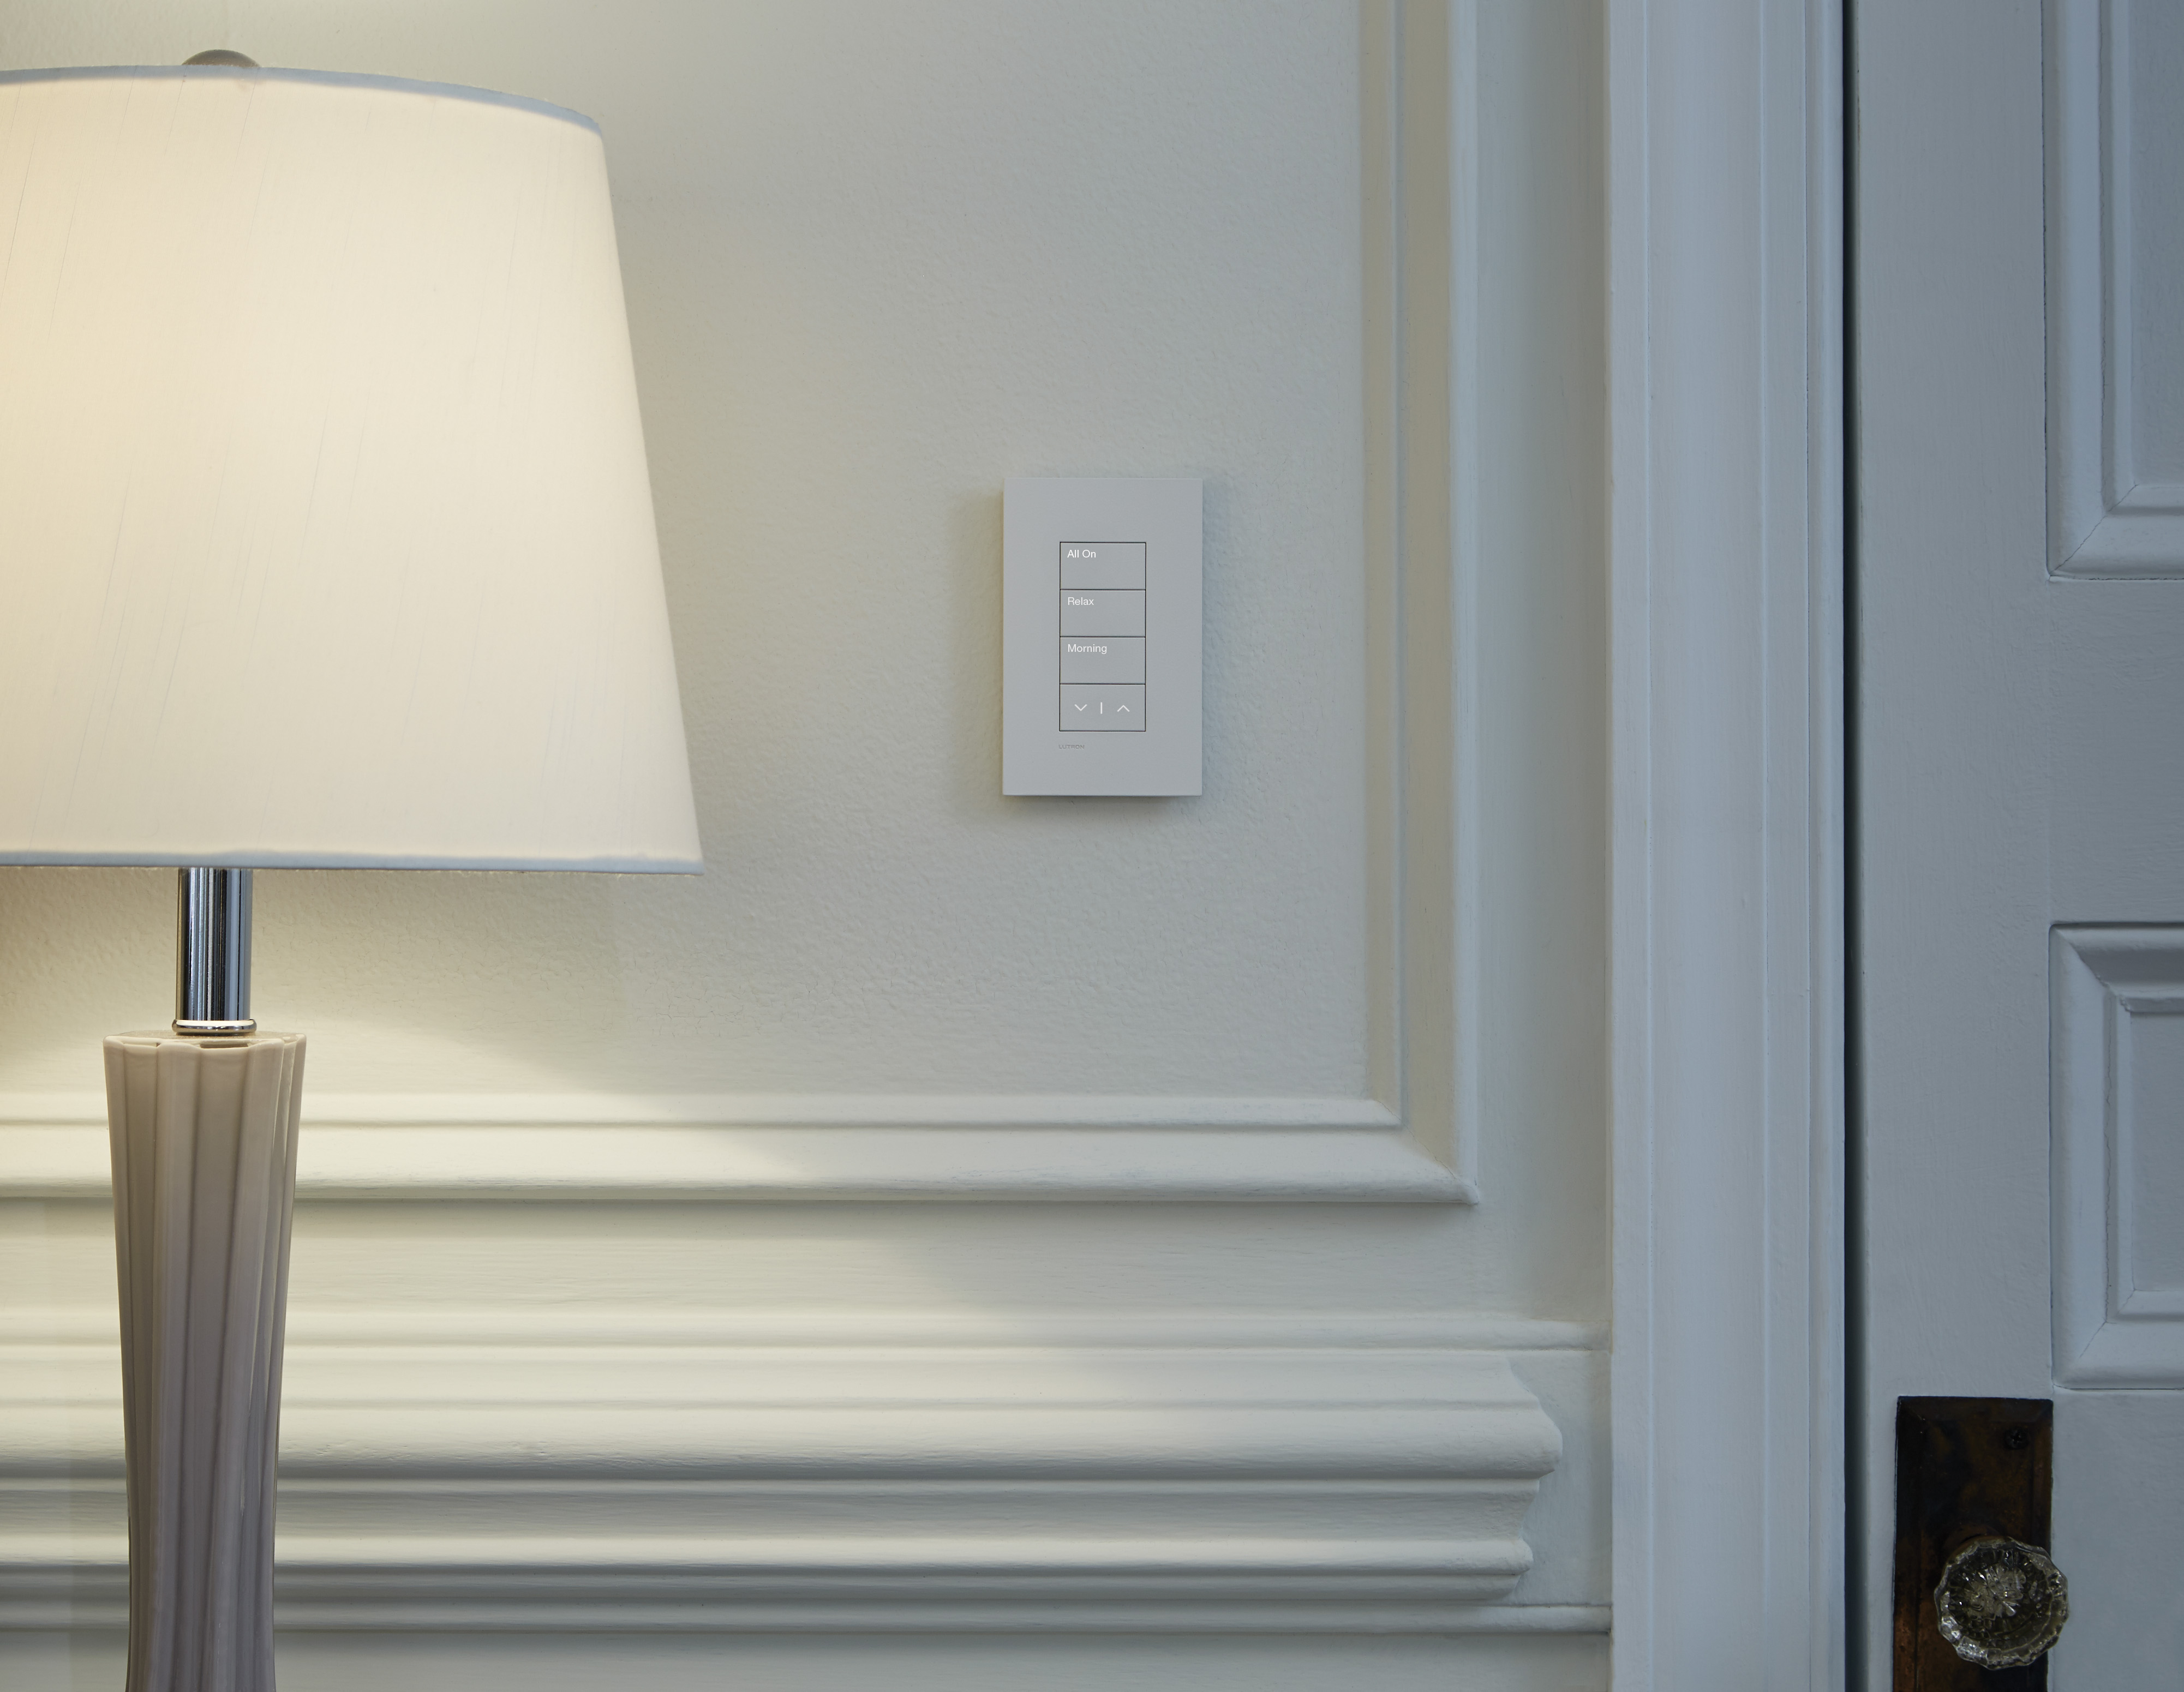 Set the Perfect Scene in Your Home with Integrated Lighting Controls 